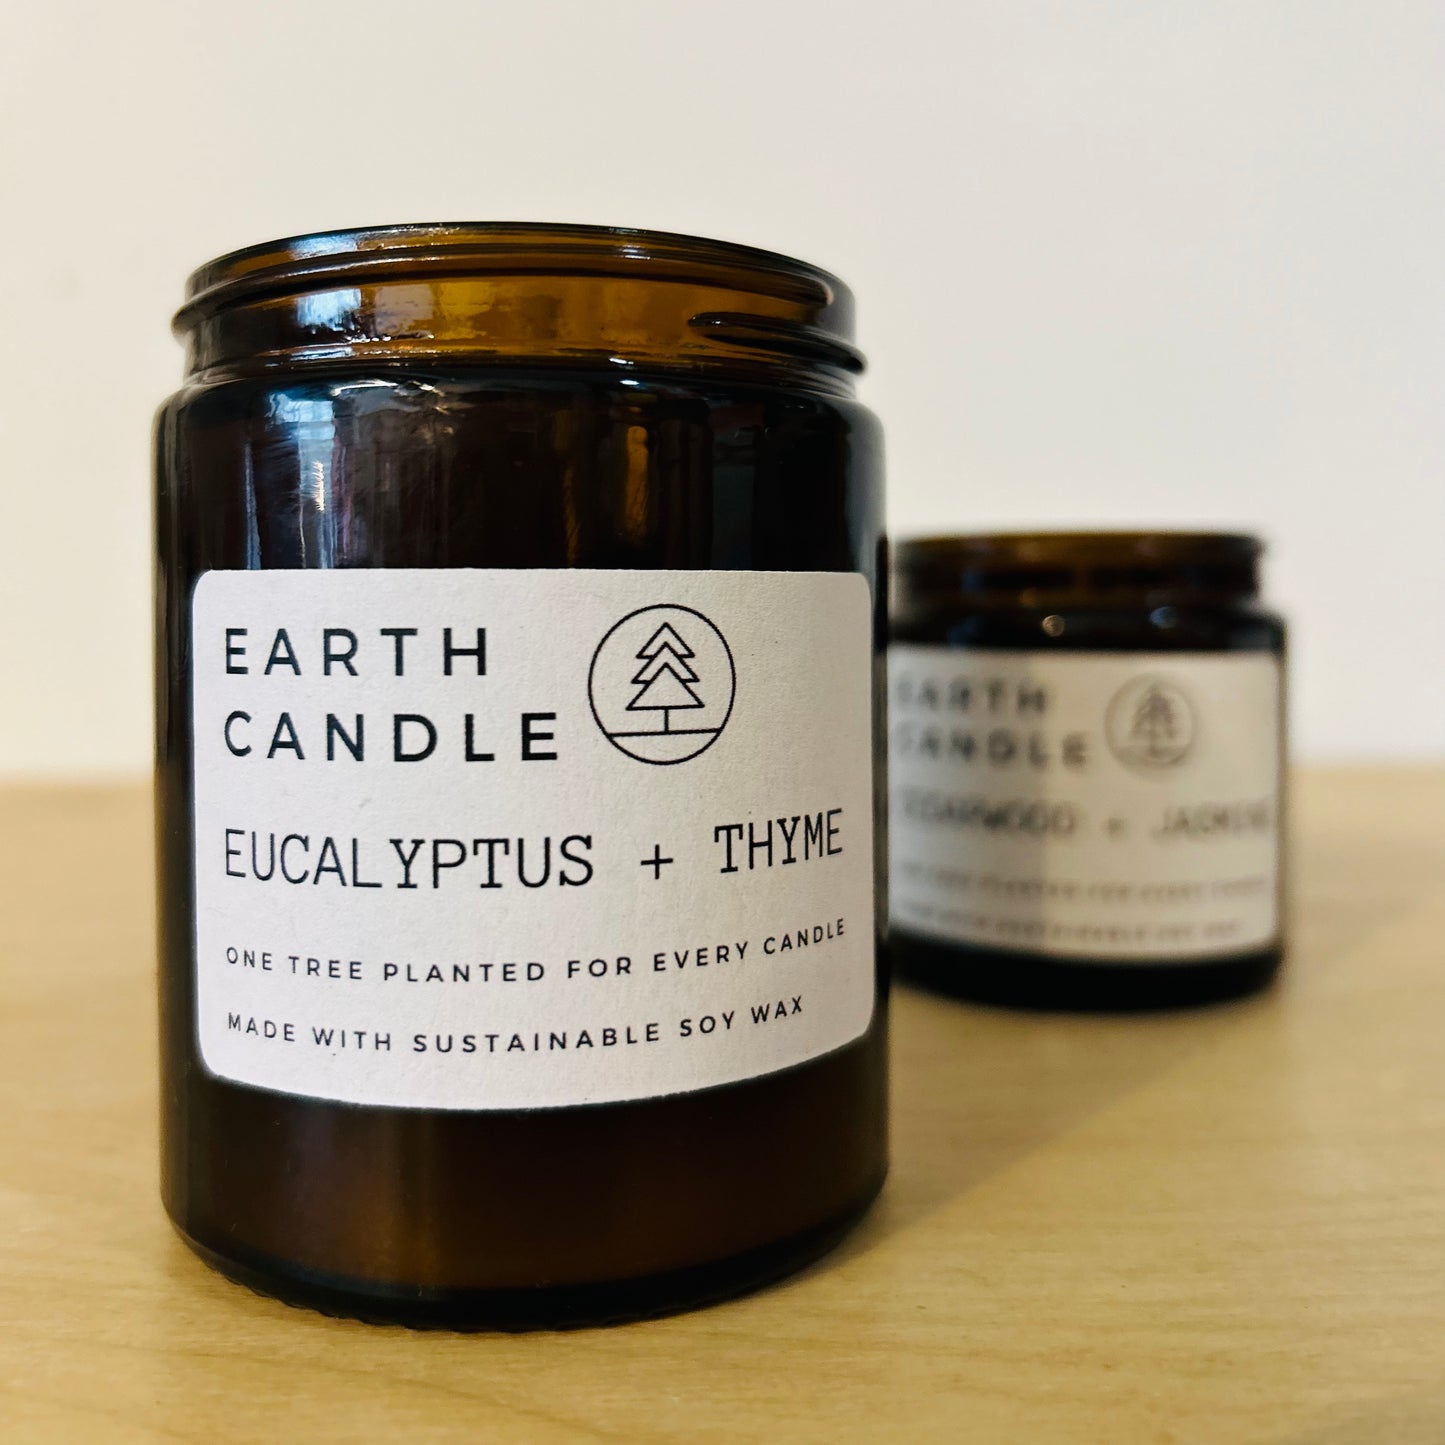 Eucalyptus + Thyme Soy Wax Eco Candle | Larger size